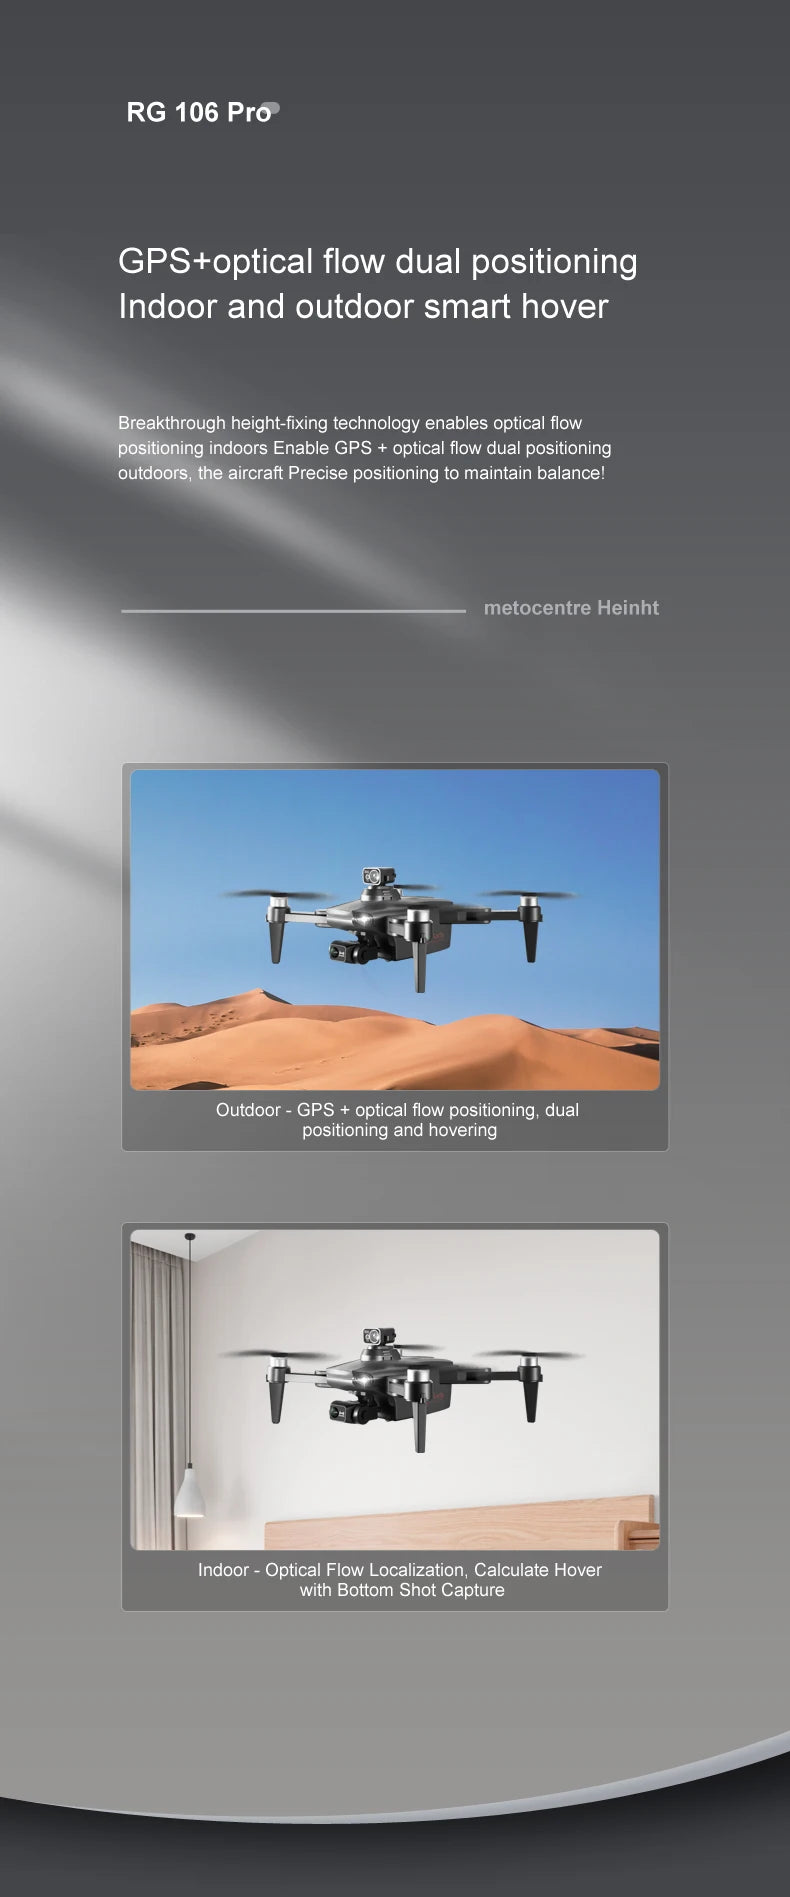 RG106 MAX Drone, RG 106 Pro GPS+optical flow dual positioning Indoor and outdoor smart hover .